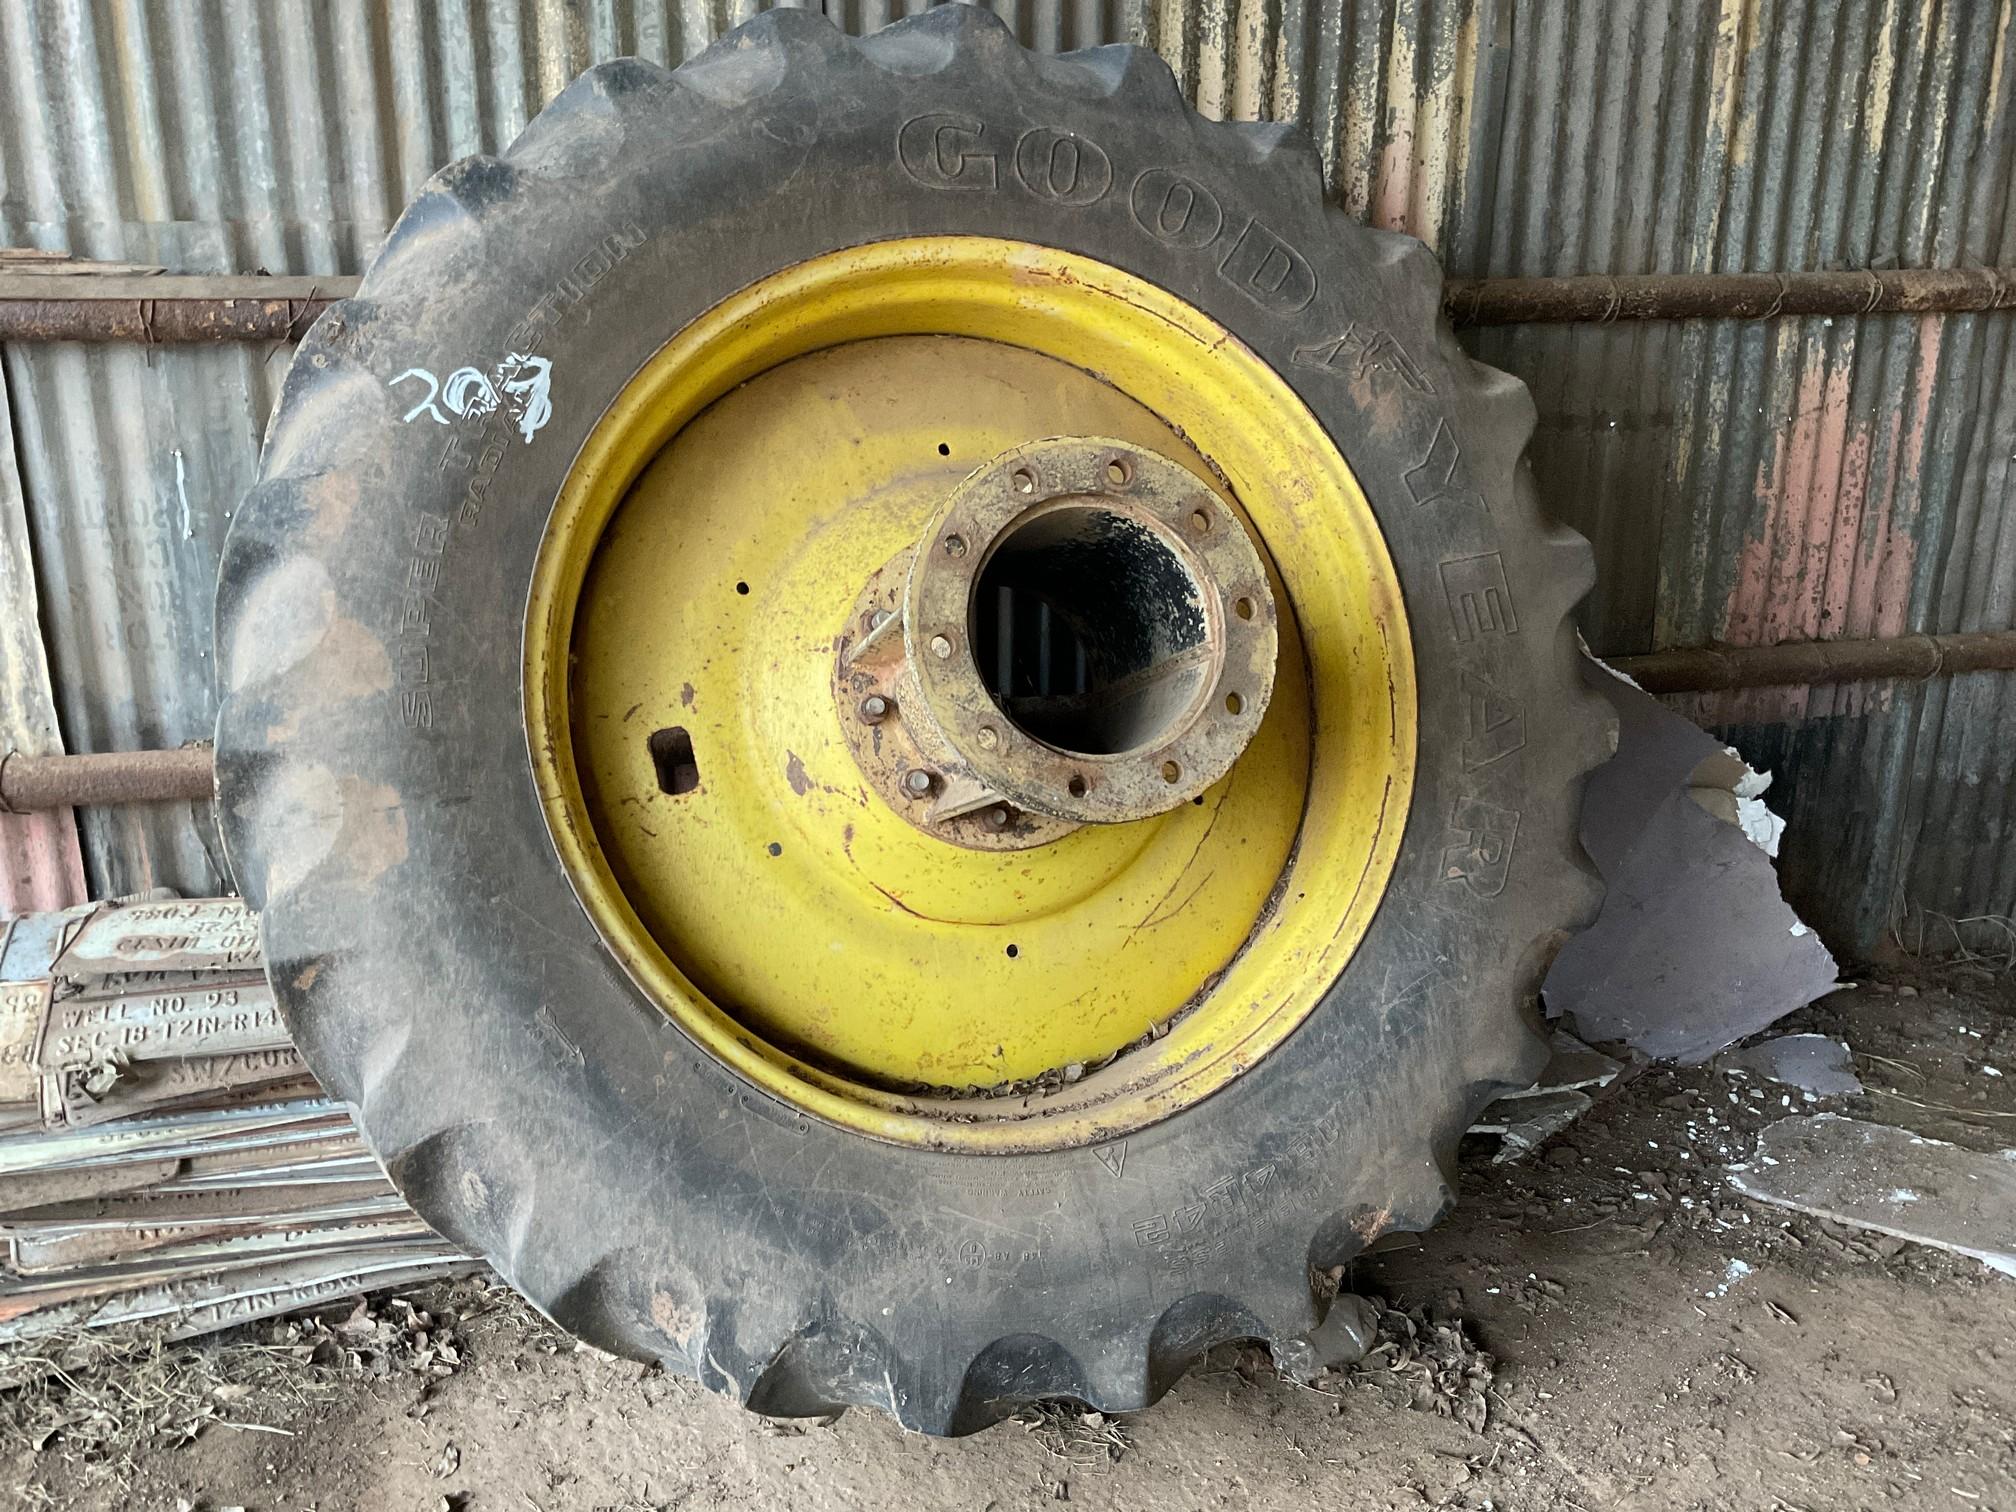 (2) Tractor tires and rim with spacers